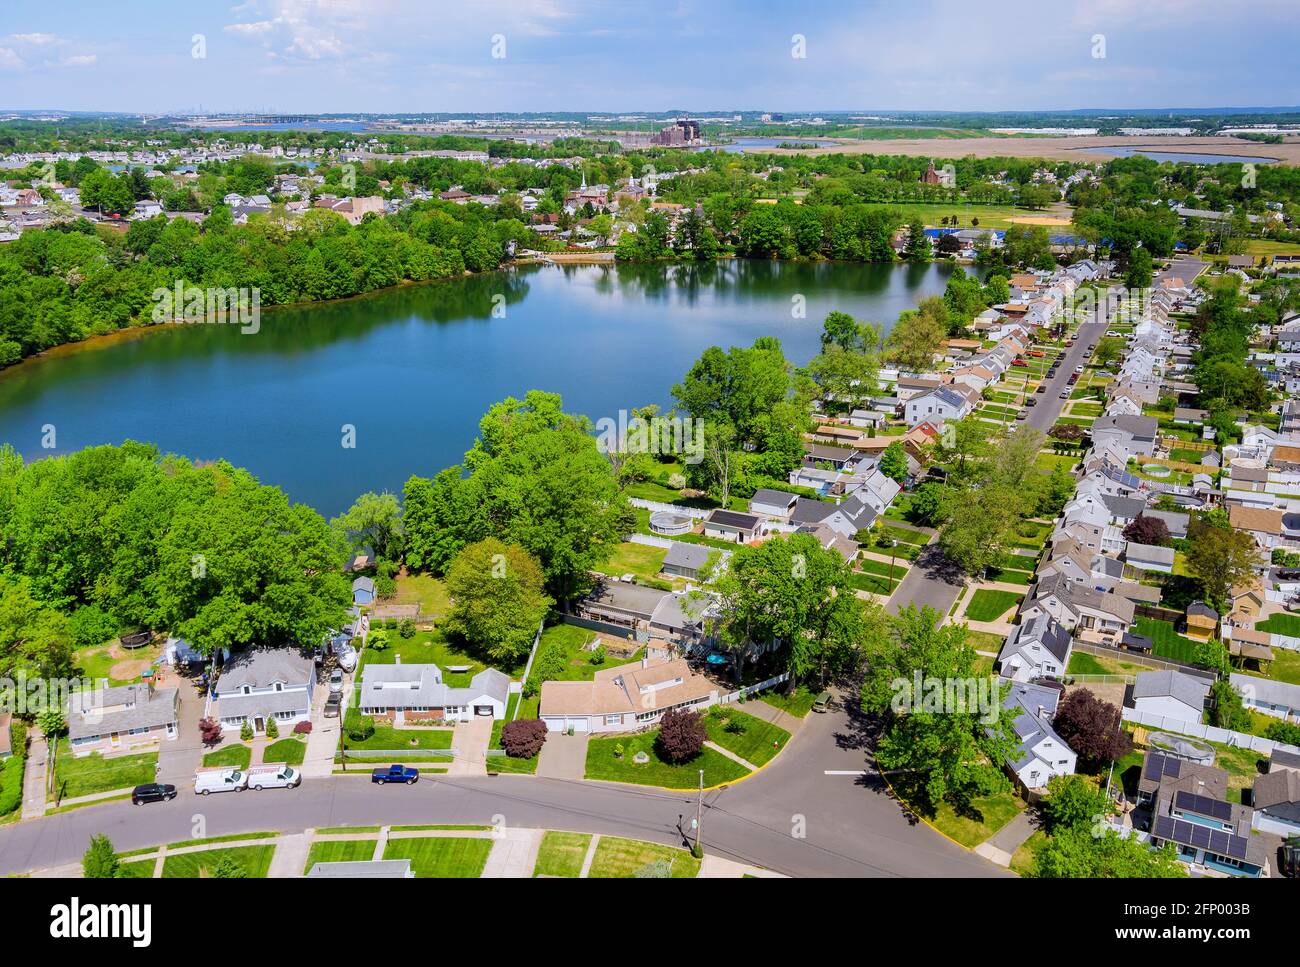 Aerial panorama view of the residential Sayreville town area of beautiful suburb of dwelling home near lake from a height in New Jersey US Stock Photo